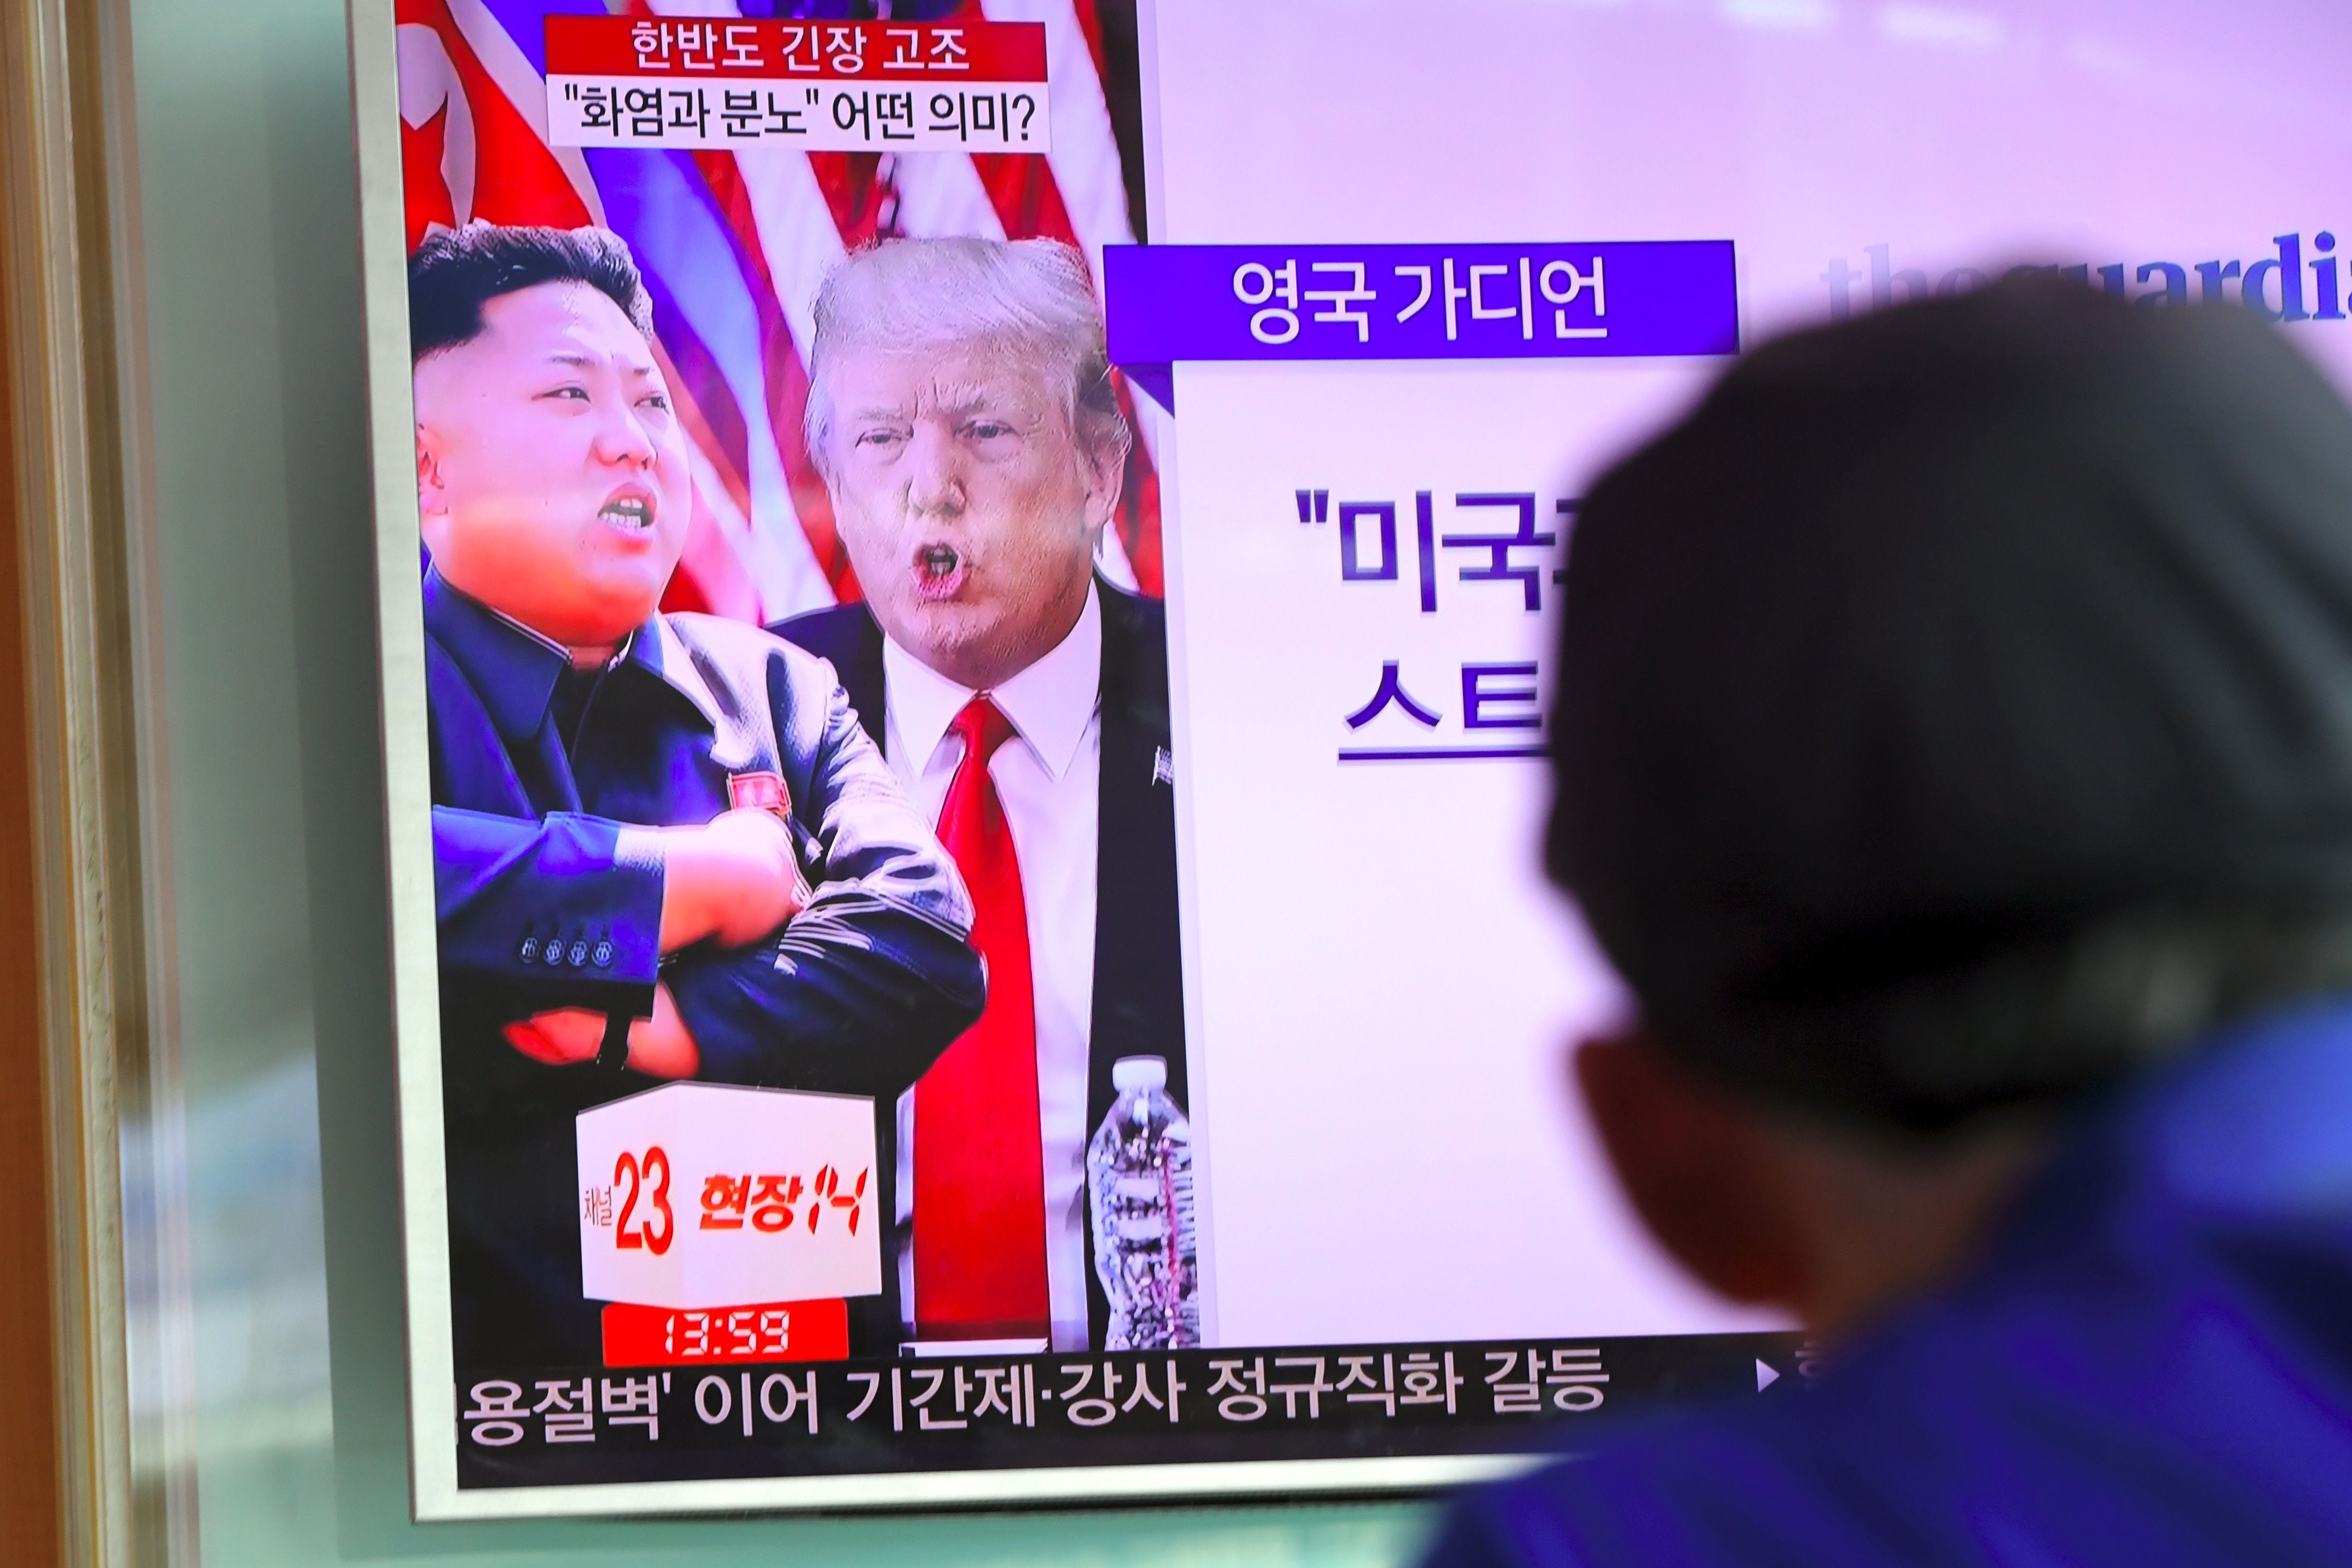 What You Should Know About North Korea and Donald Trump